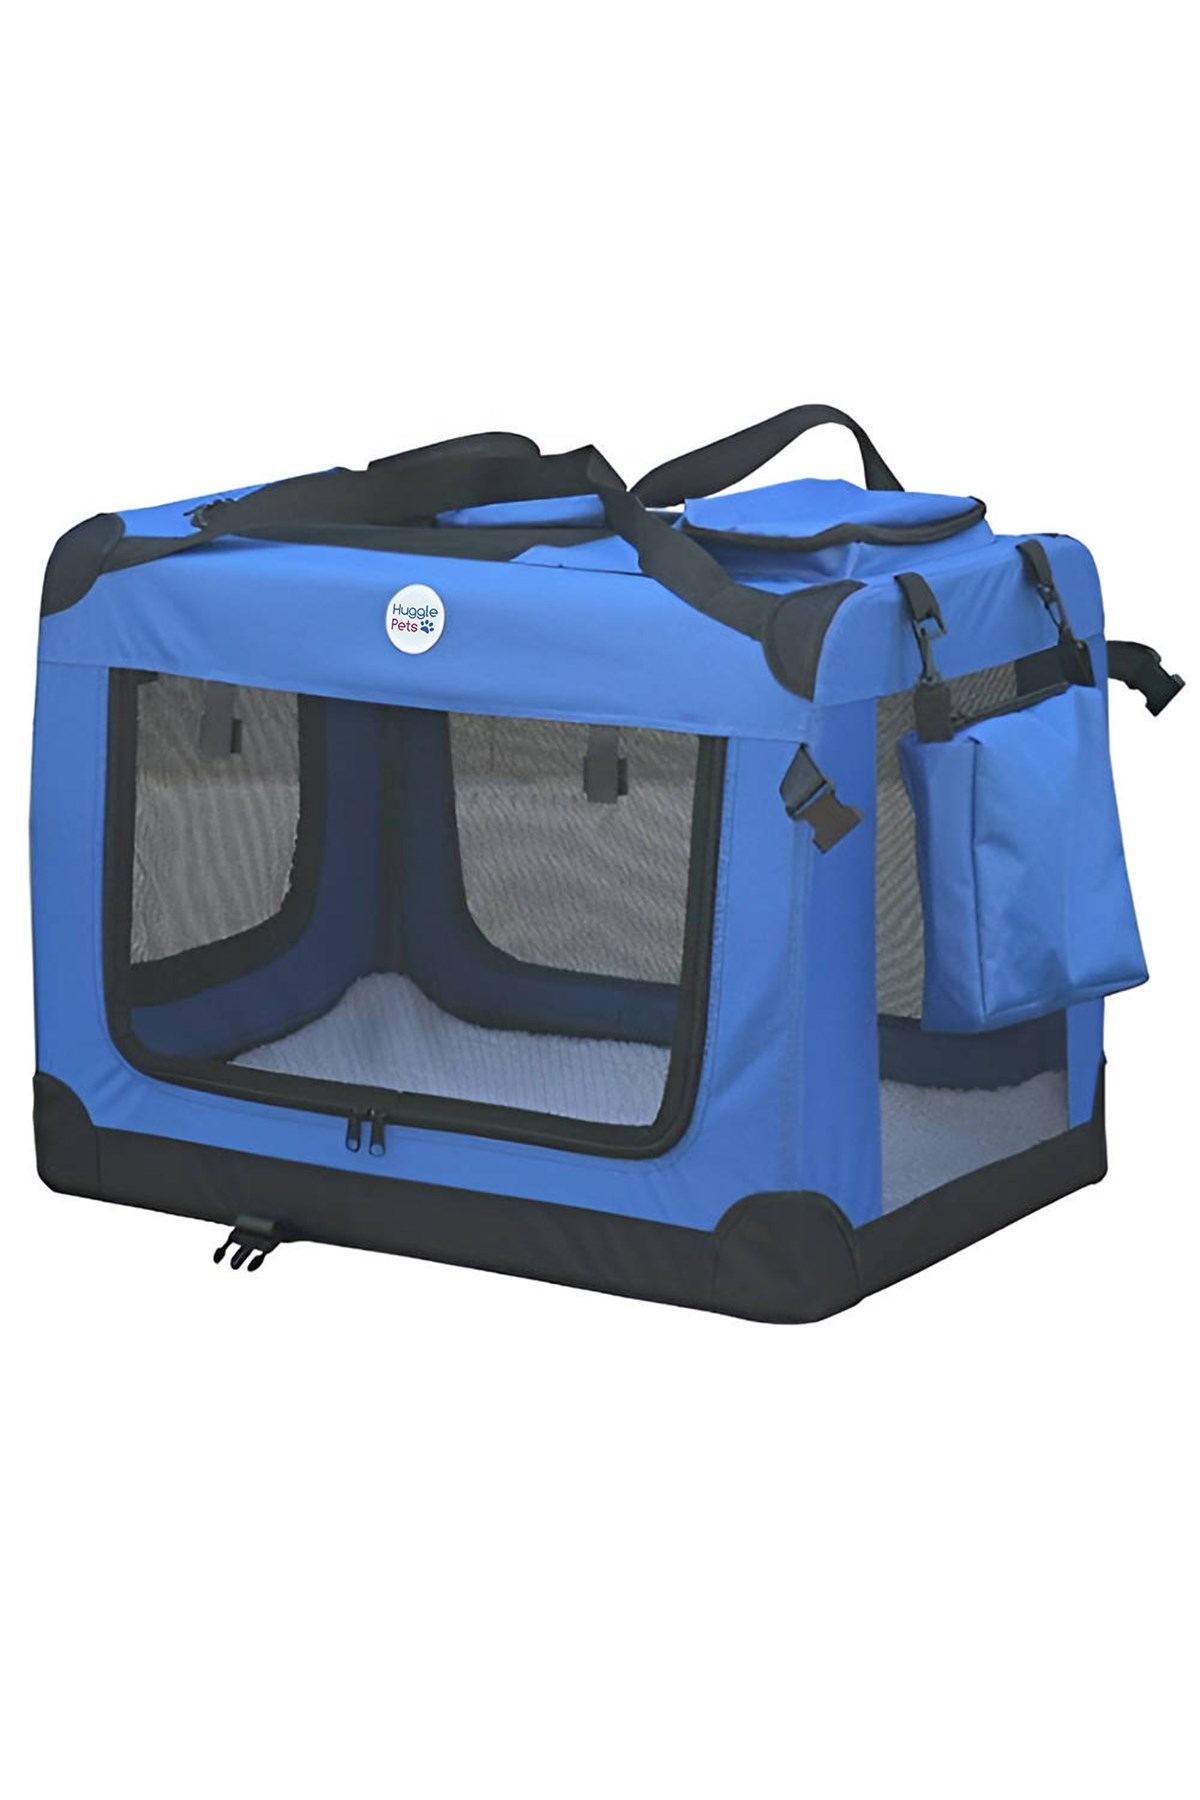 Fabric Crate Pet Carrier -